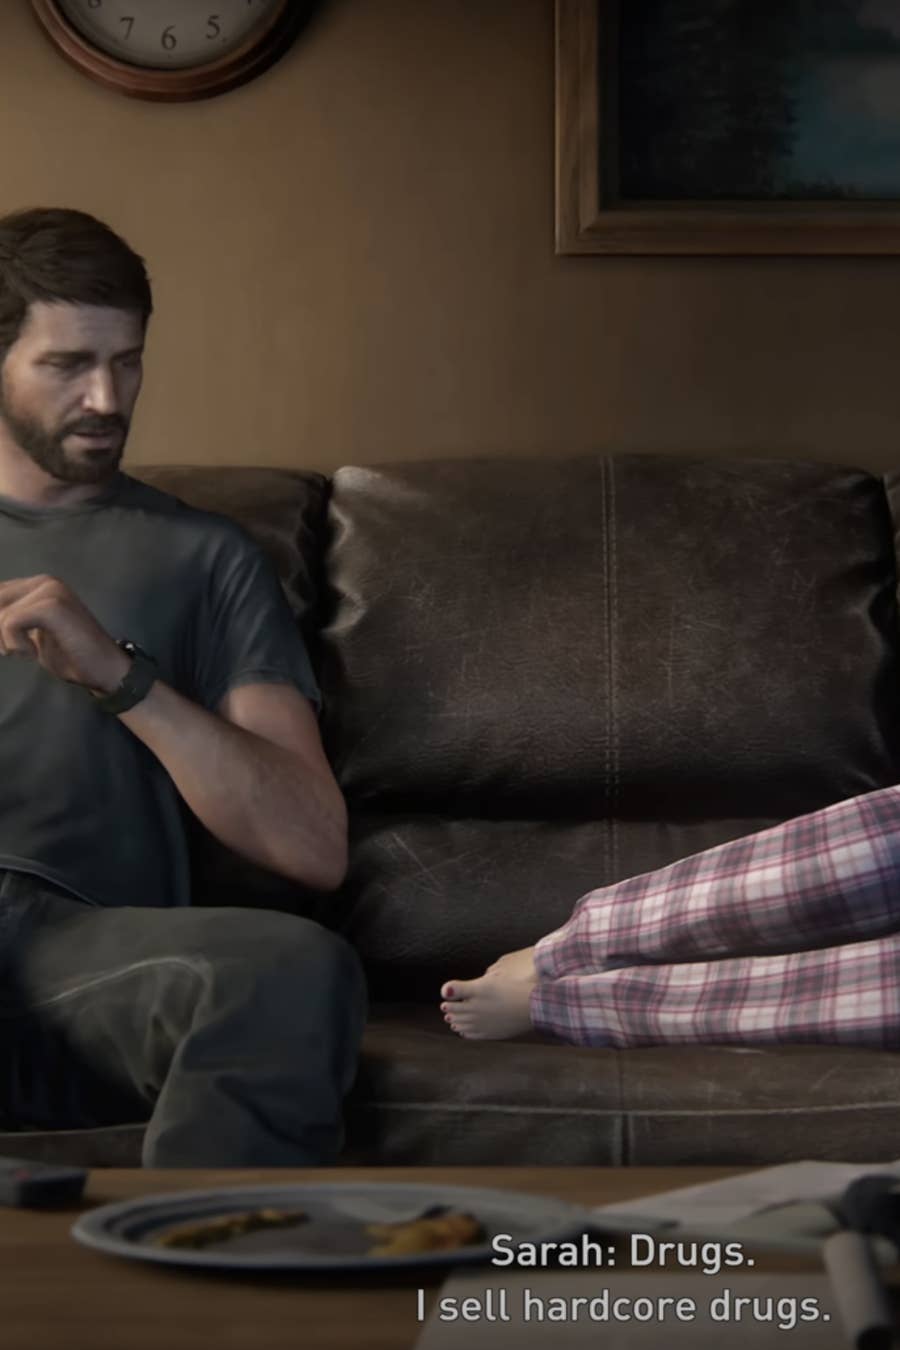 13 Changes The Last Of Us TV Show Made To The Game, And 9 Things